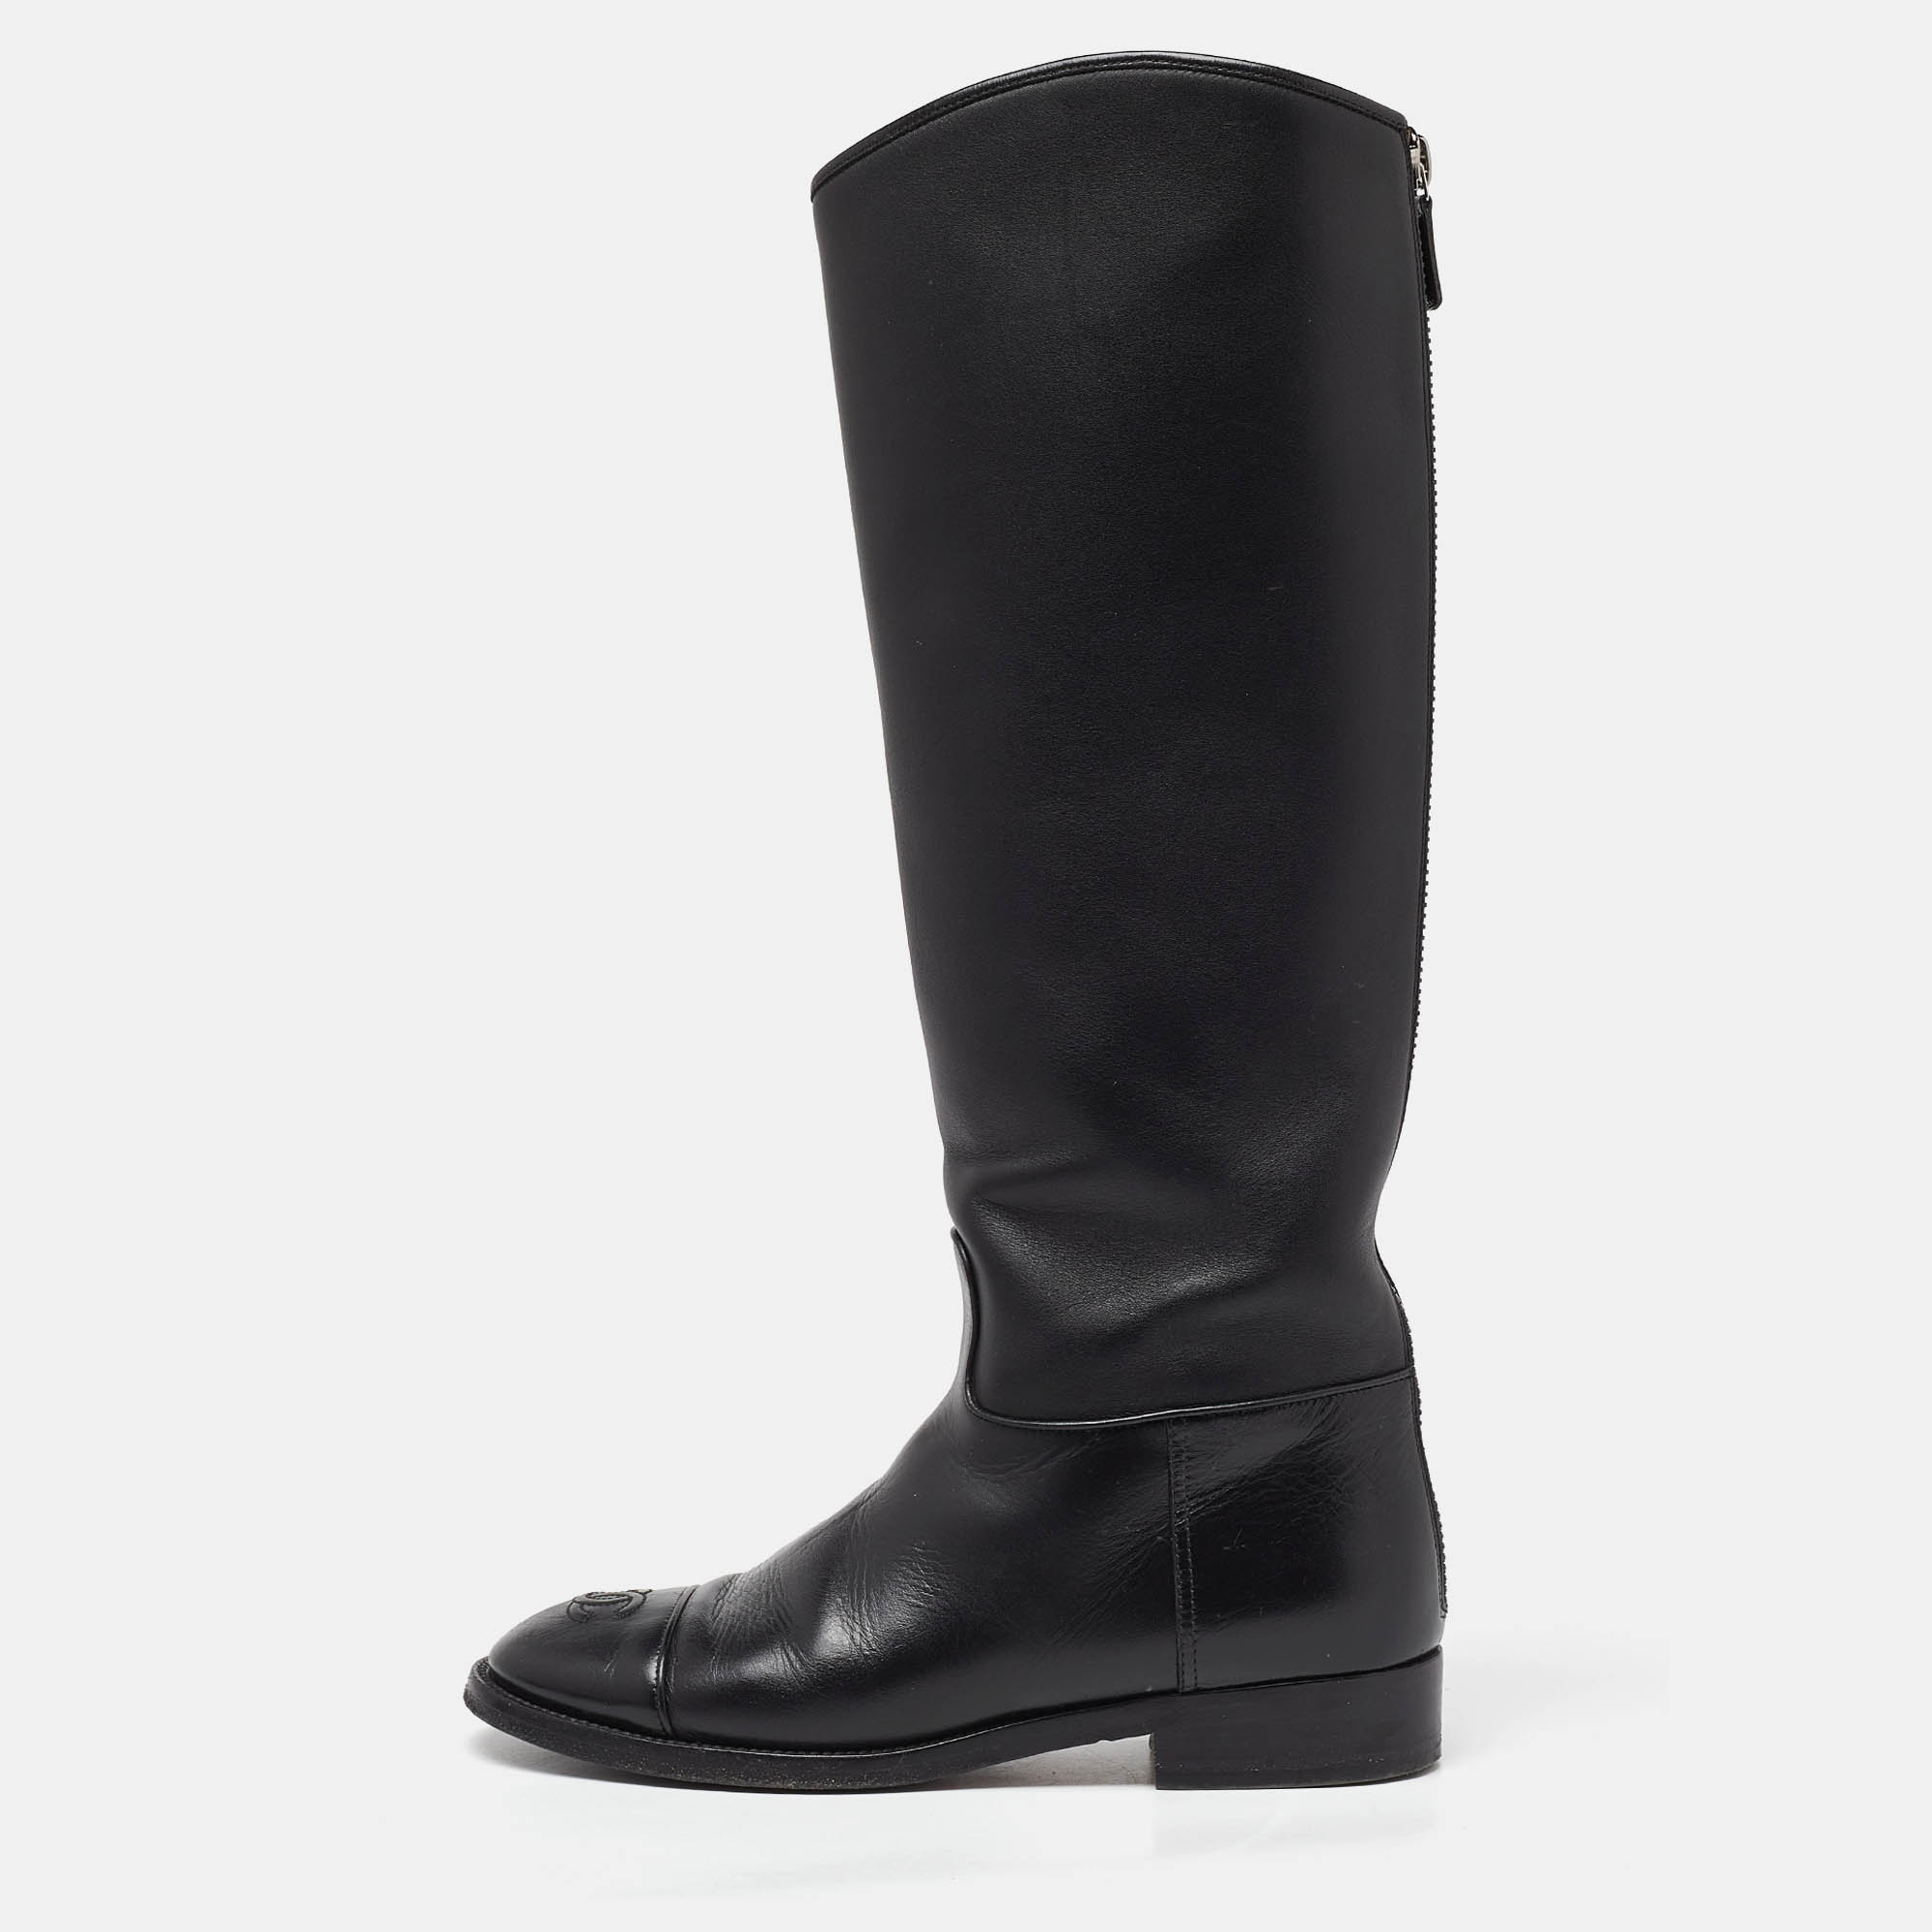 Chanel black leather cc cap toe knee length boots size 38